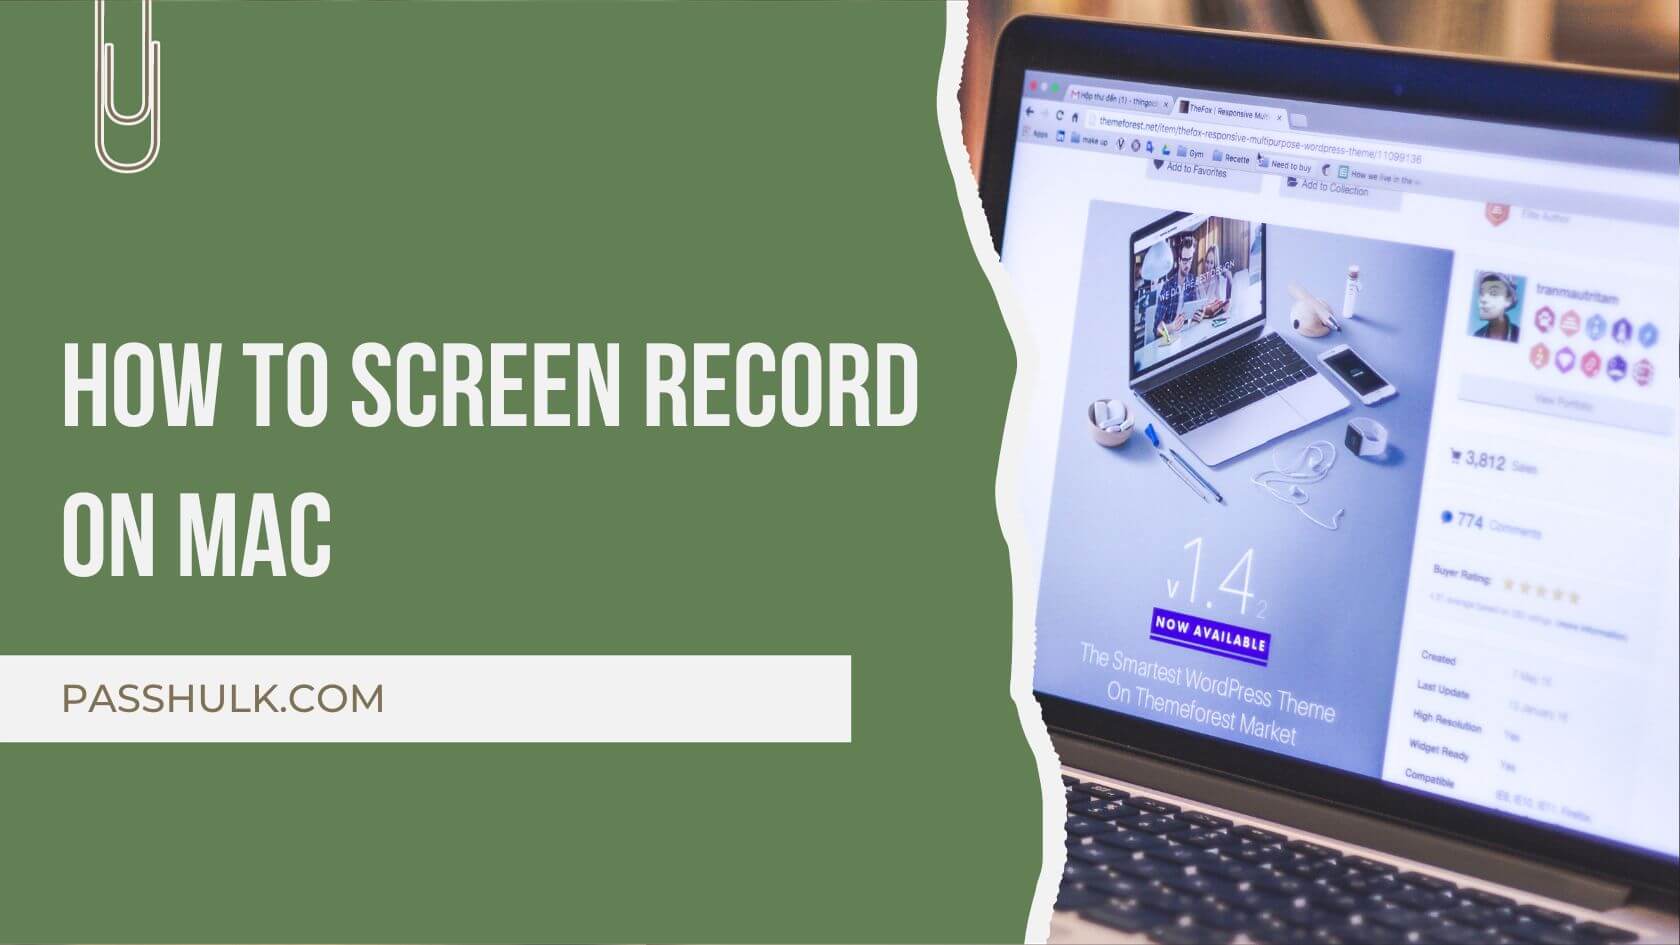 How To Screen Record On Mac: The Ultimate Guide